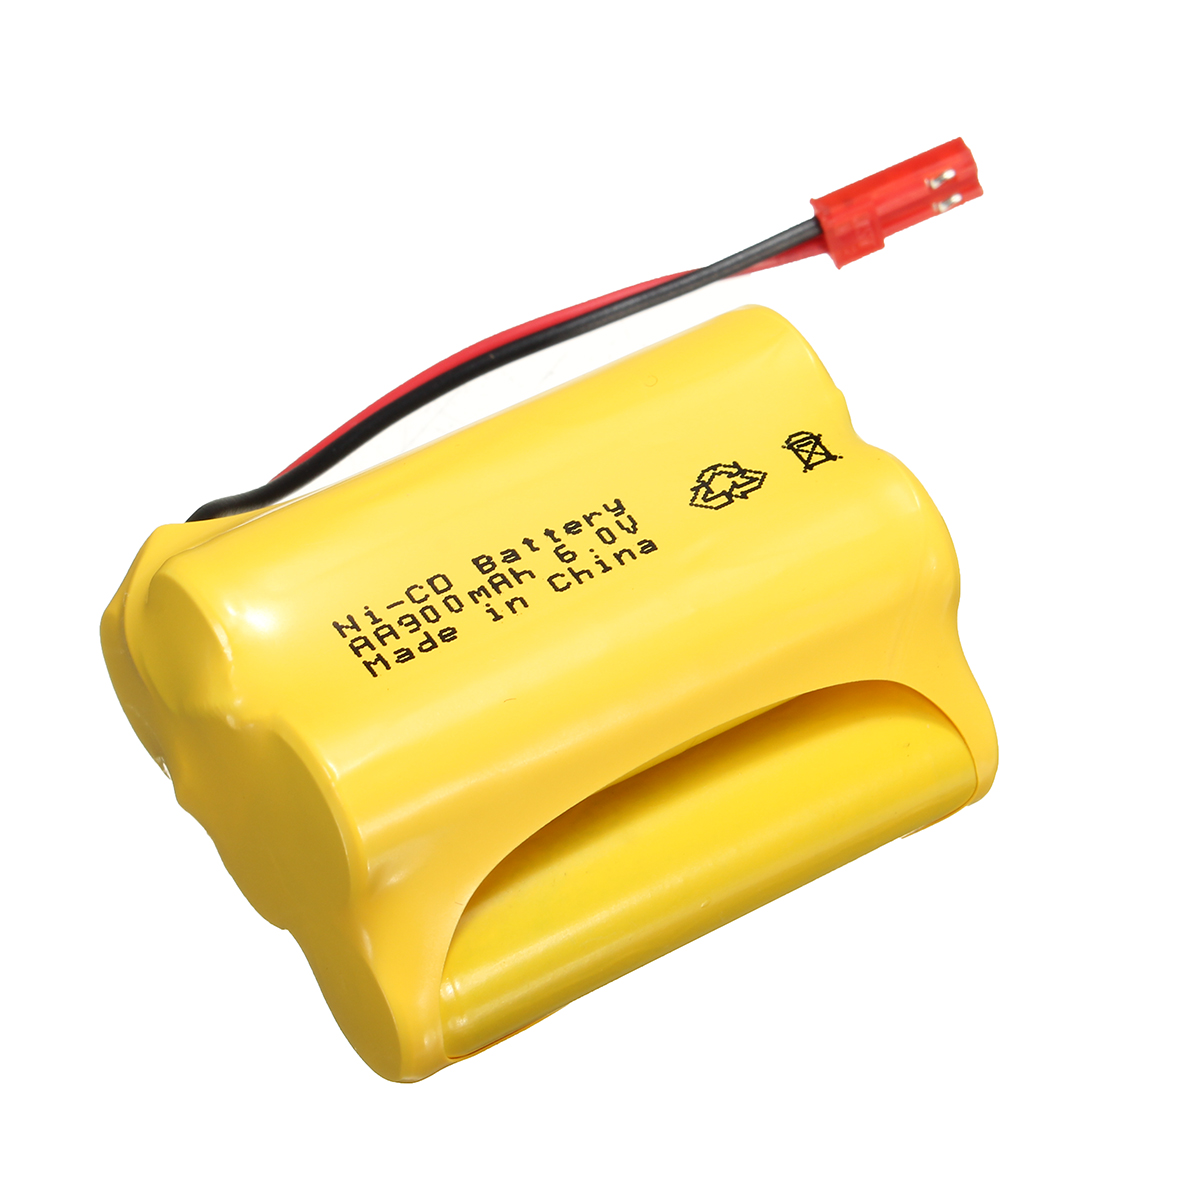 Ni-Cd-6V-900mAh-JST-SYP-Plug-Rechargeable-Battery-Solar-Light-For-Racing-Remote-Control-Car-1299833-4